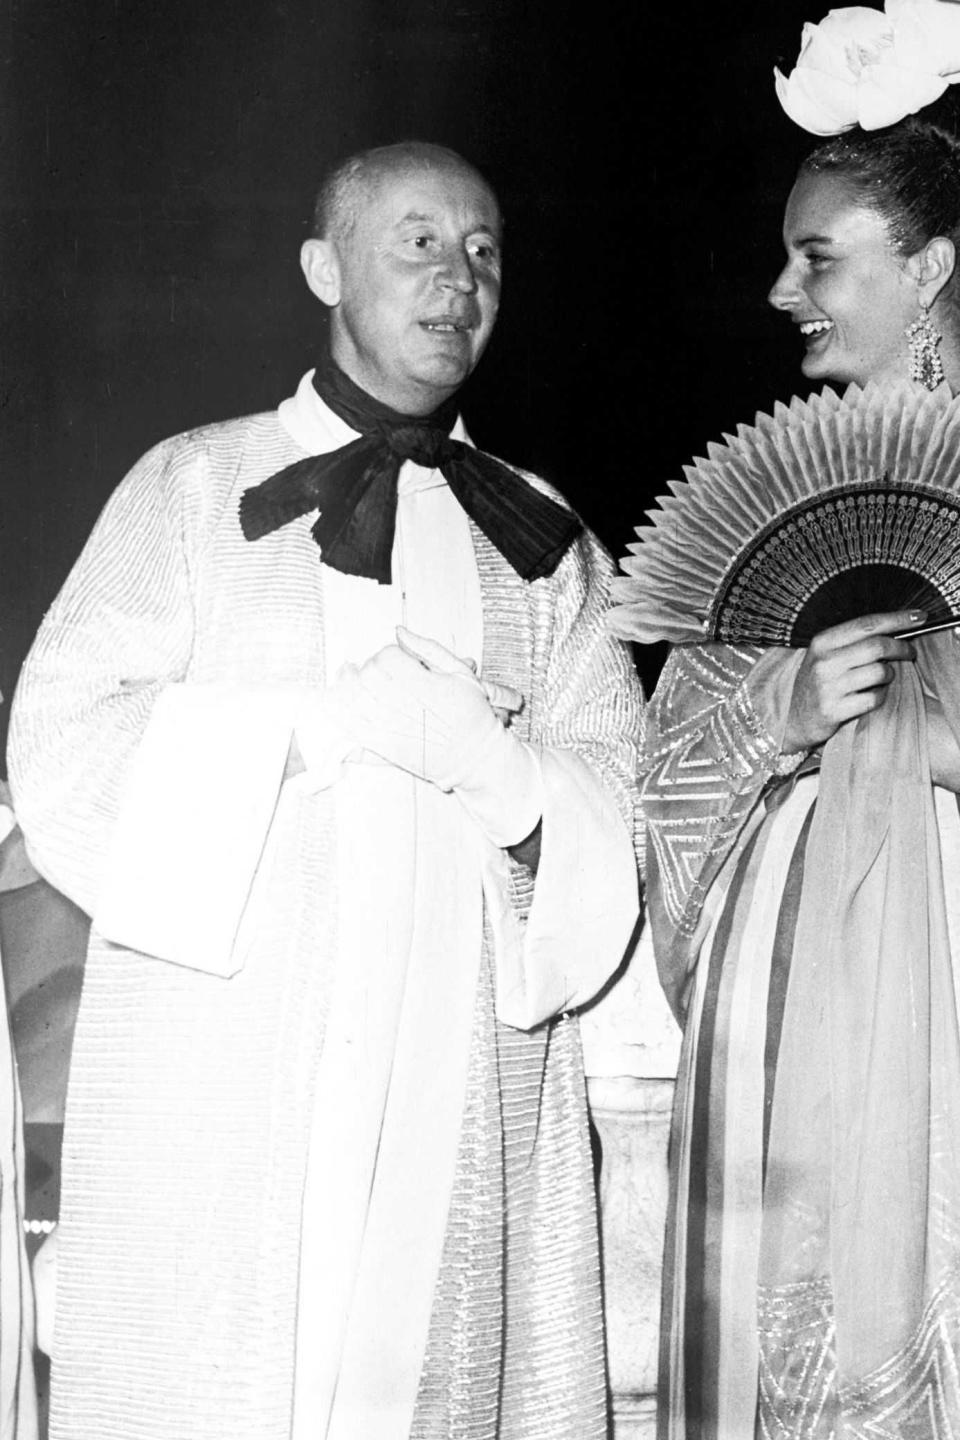 Christian Dior, left, as Pierrot at the Beistegui costume ball, 1951.